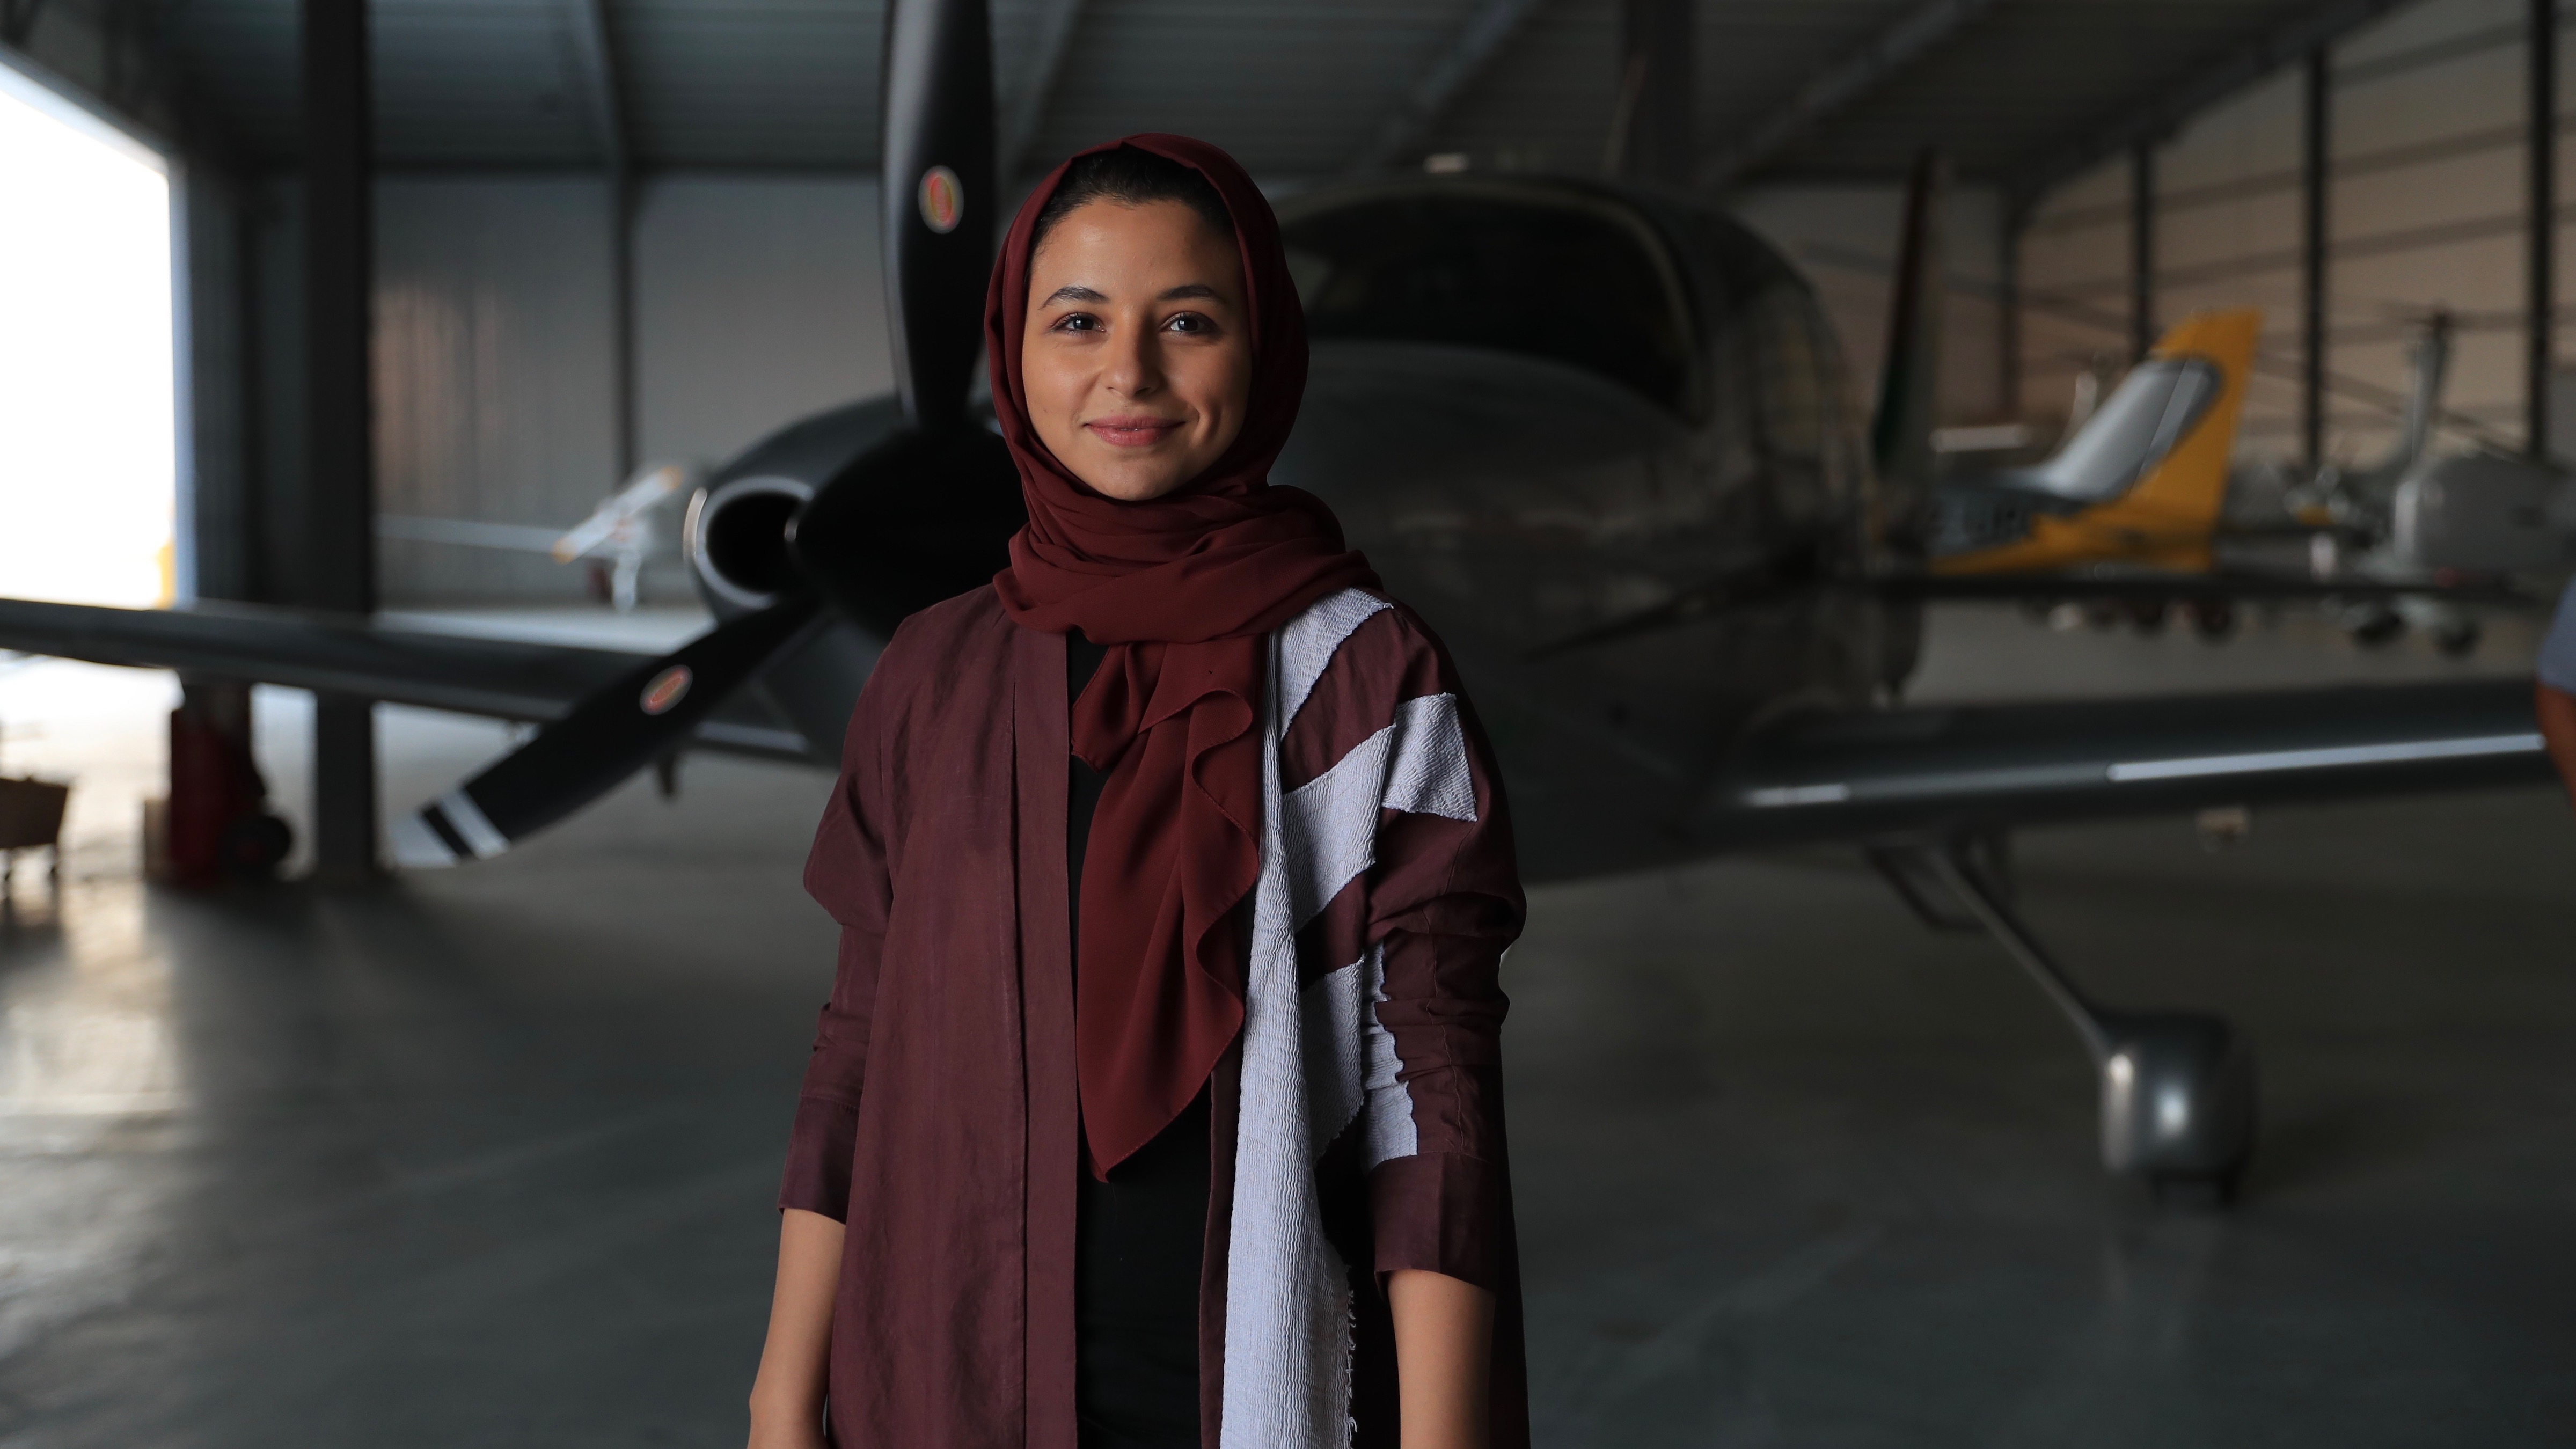 Smiling woman in hijab with small light aircraft behind her